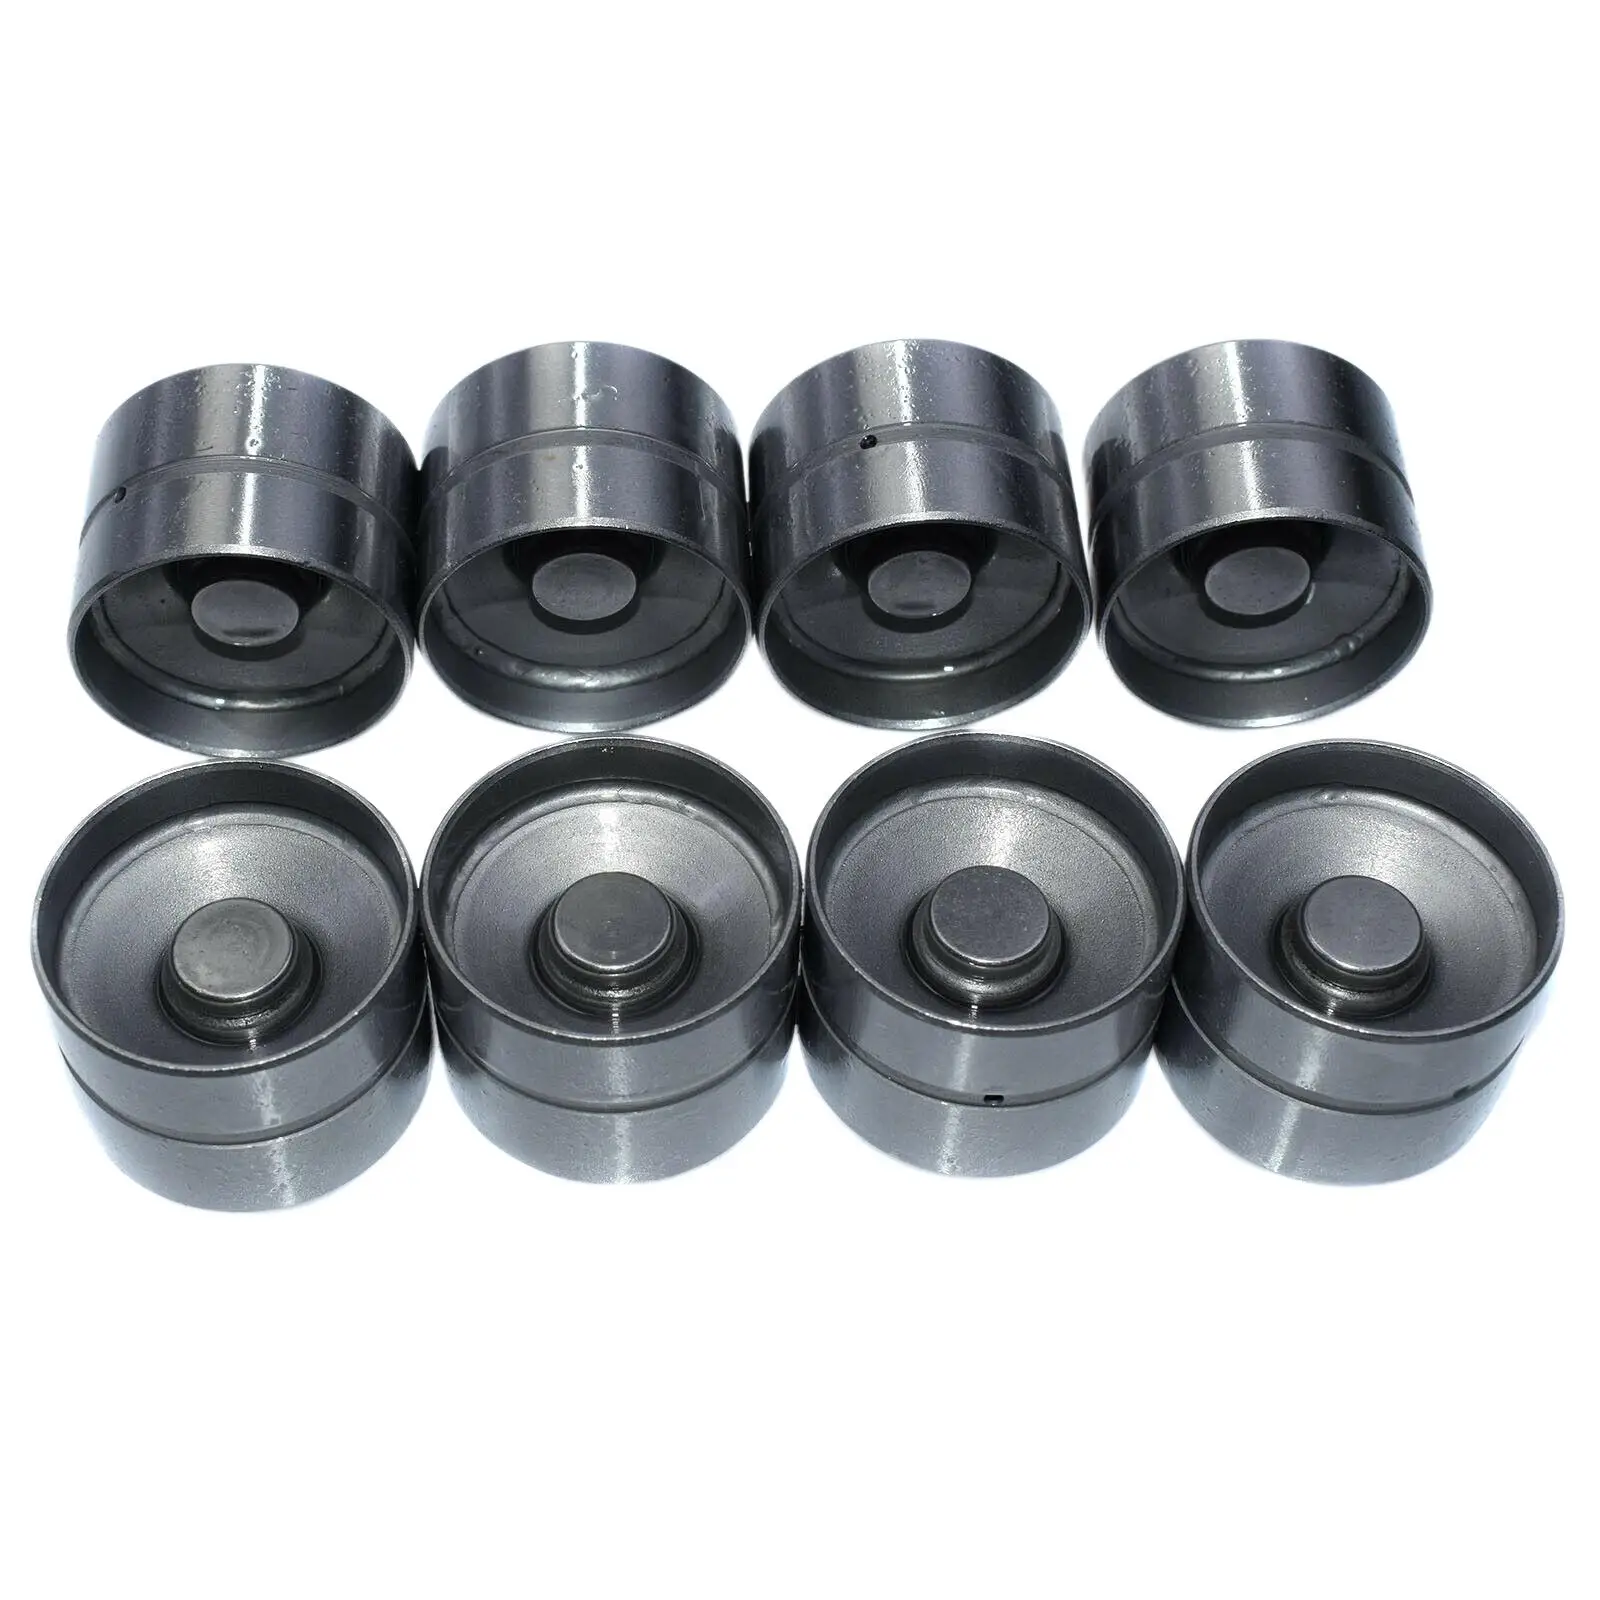  Engine Camshaft Hydraulic Lifter Tappets Follower Tappet Set Fit  A3  050109309M 050109309A 050109309H